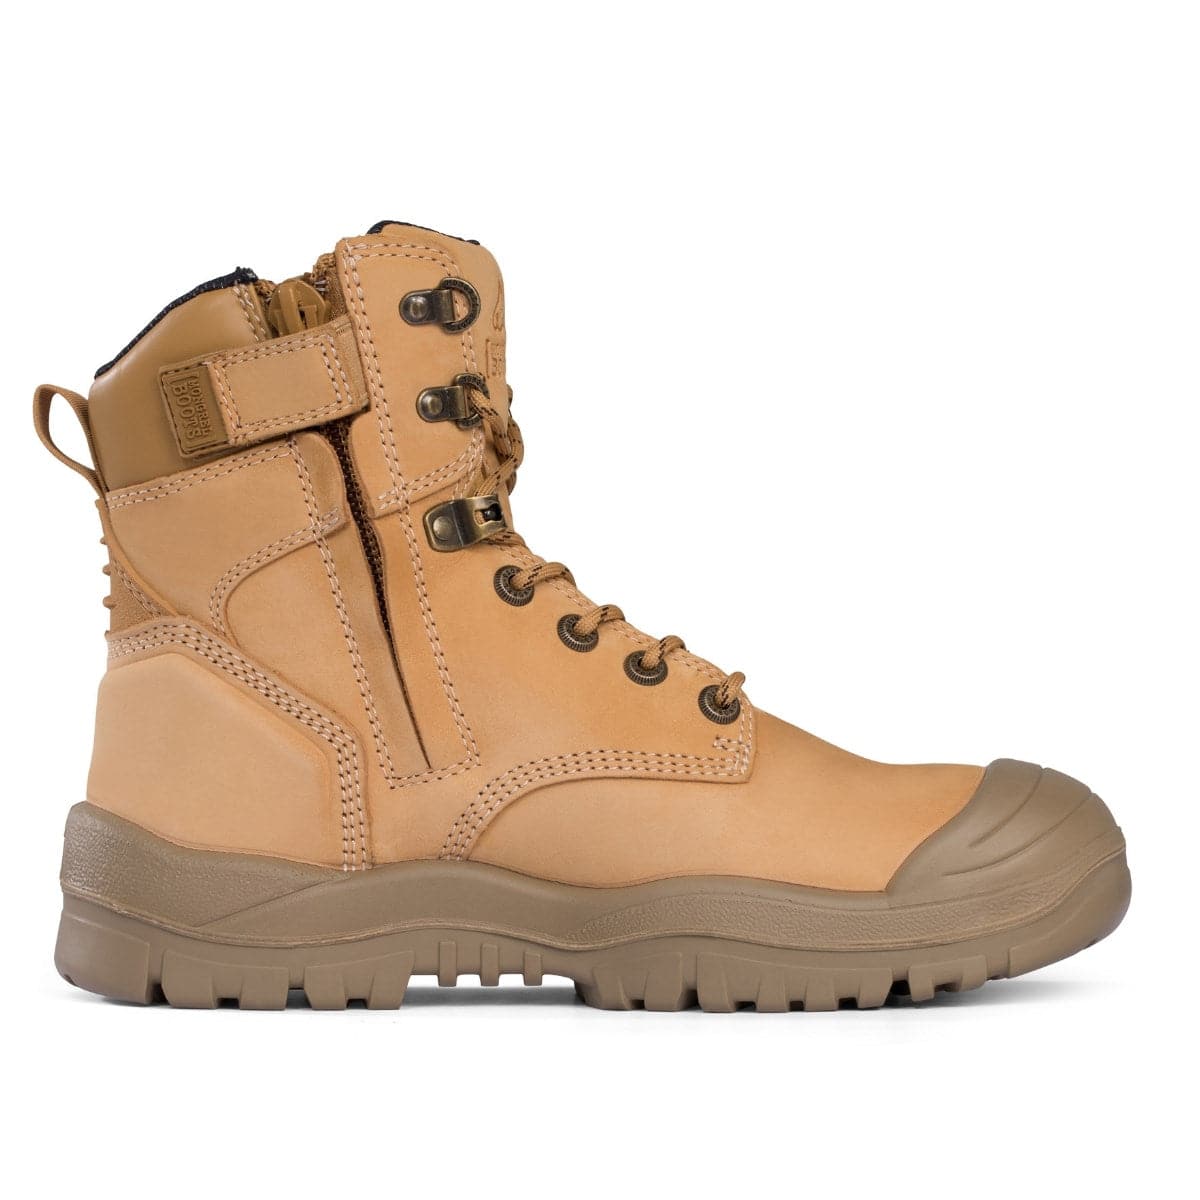 Mongrel Wheat High Ankle ZipSider Safety Boot 561050